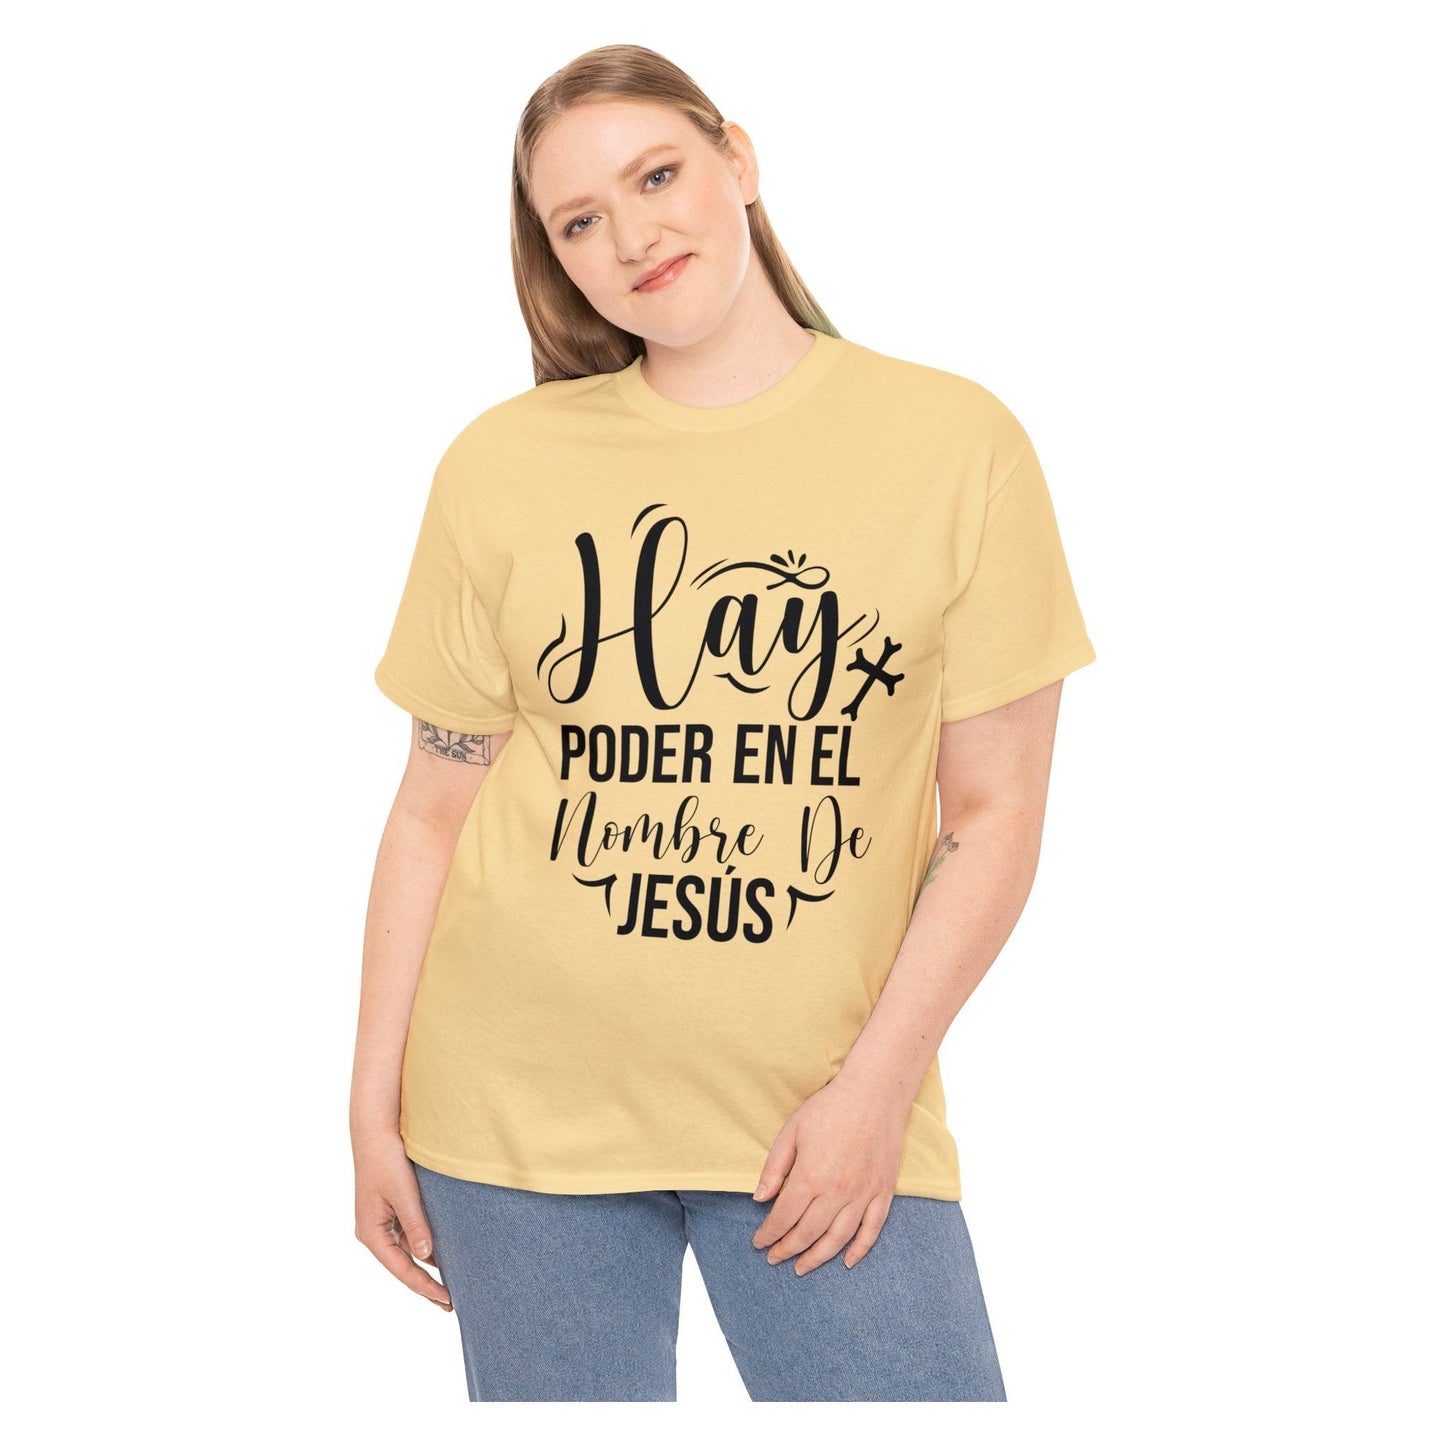 Christian T-shirt - There is power in the name of Jesus